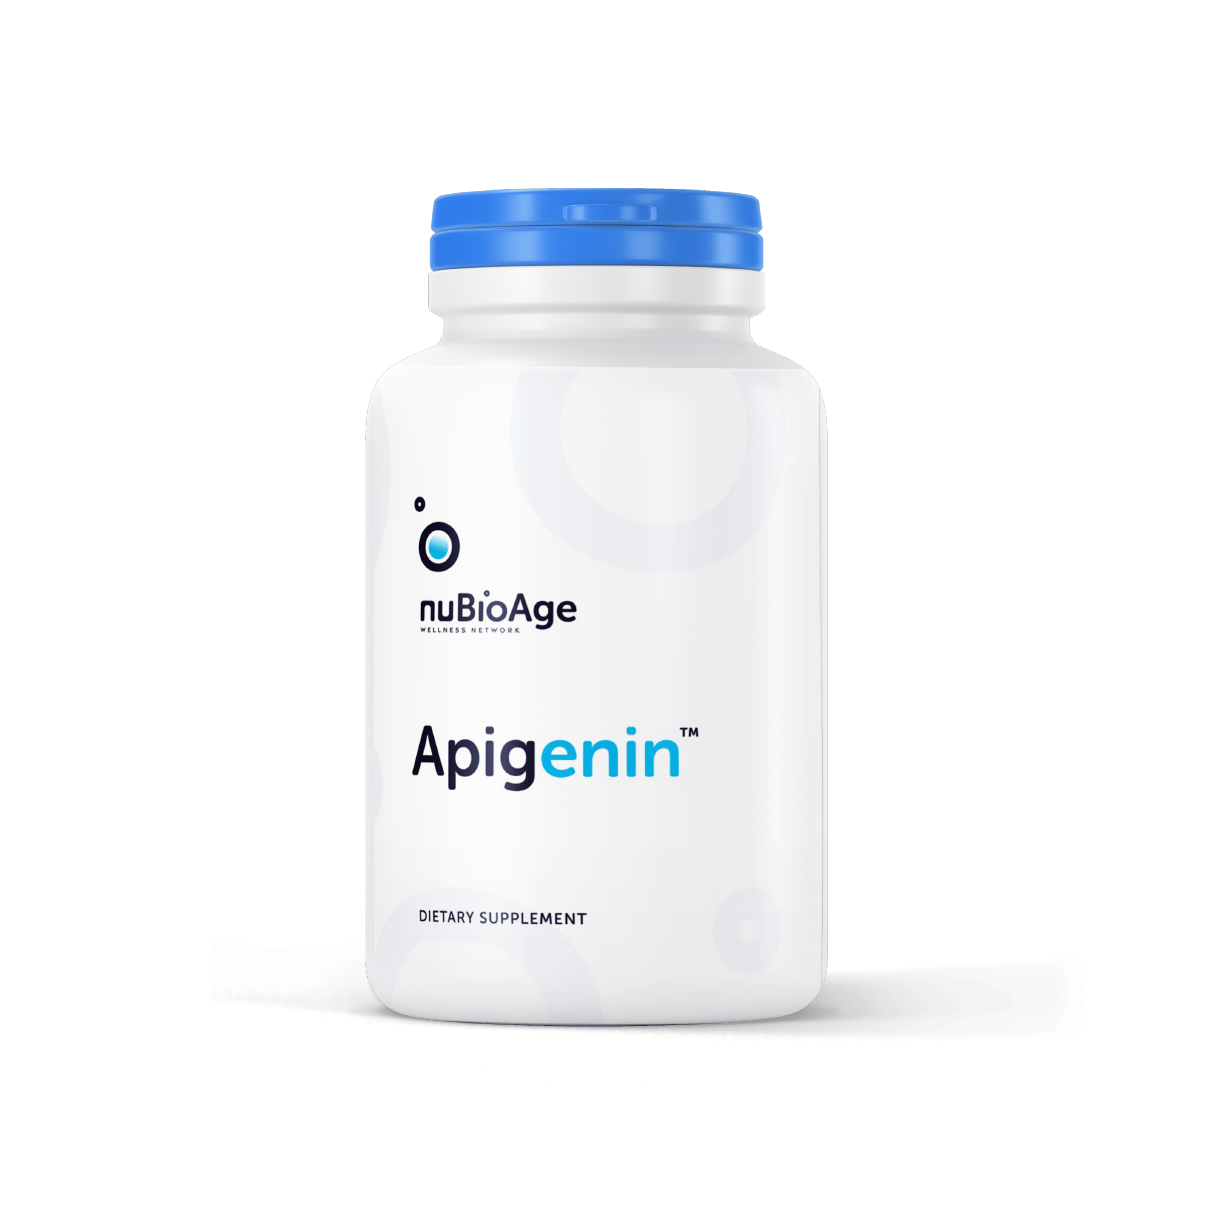 A bottle of Apigenin | 30 count by OHP Health by Longevity Labs Inc., a compound known for its effects on gut microbiota and CD38, placed on a clean white background.